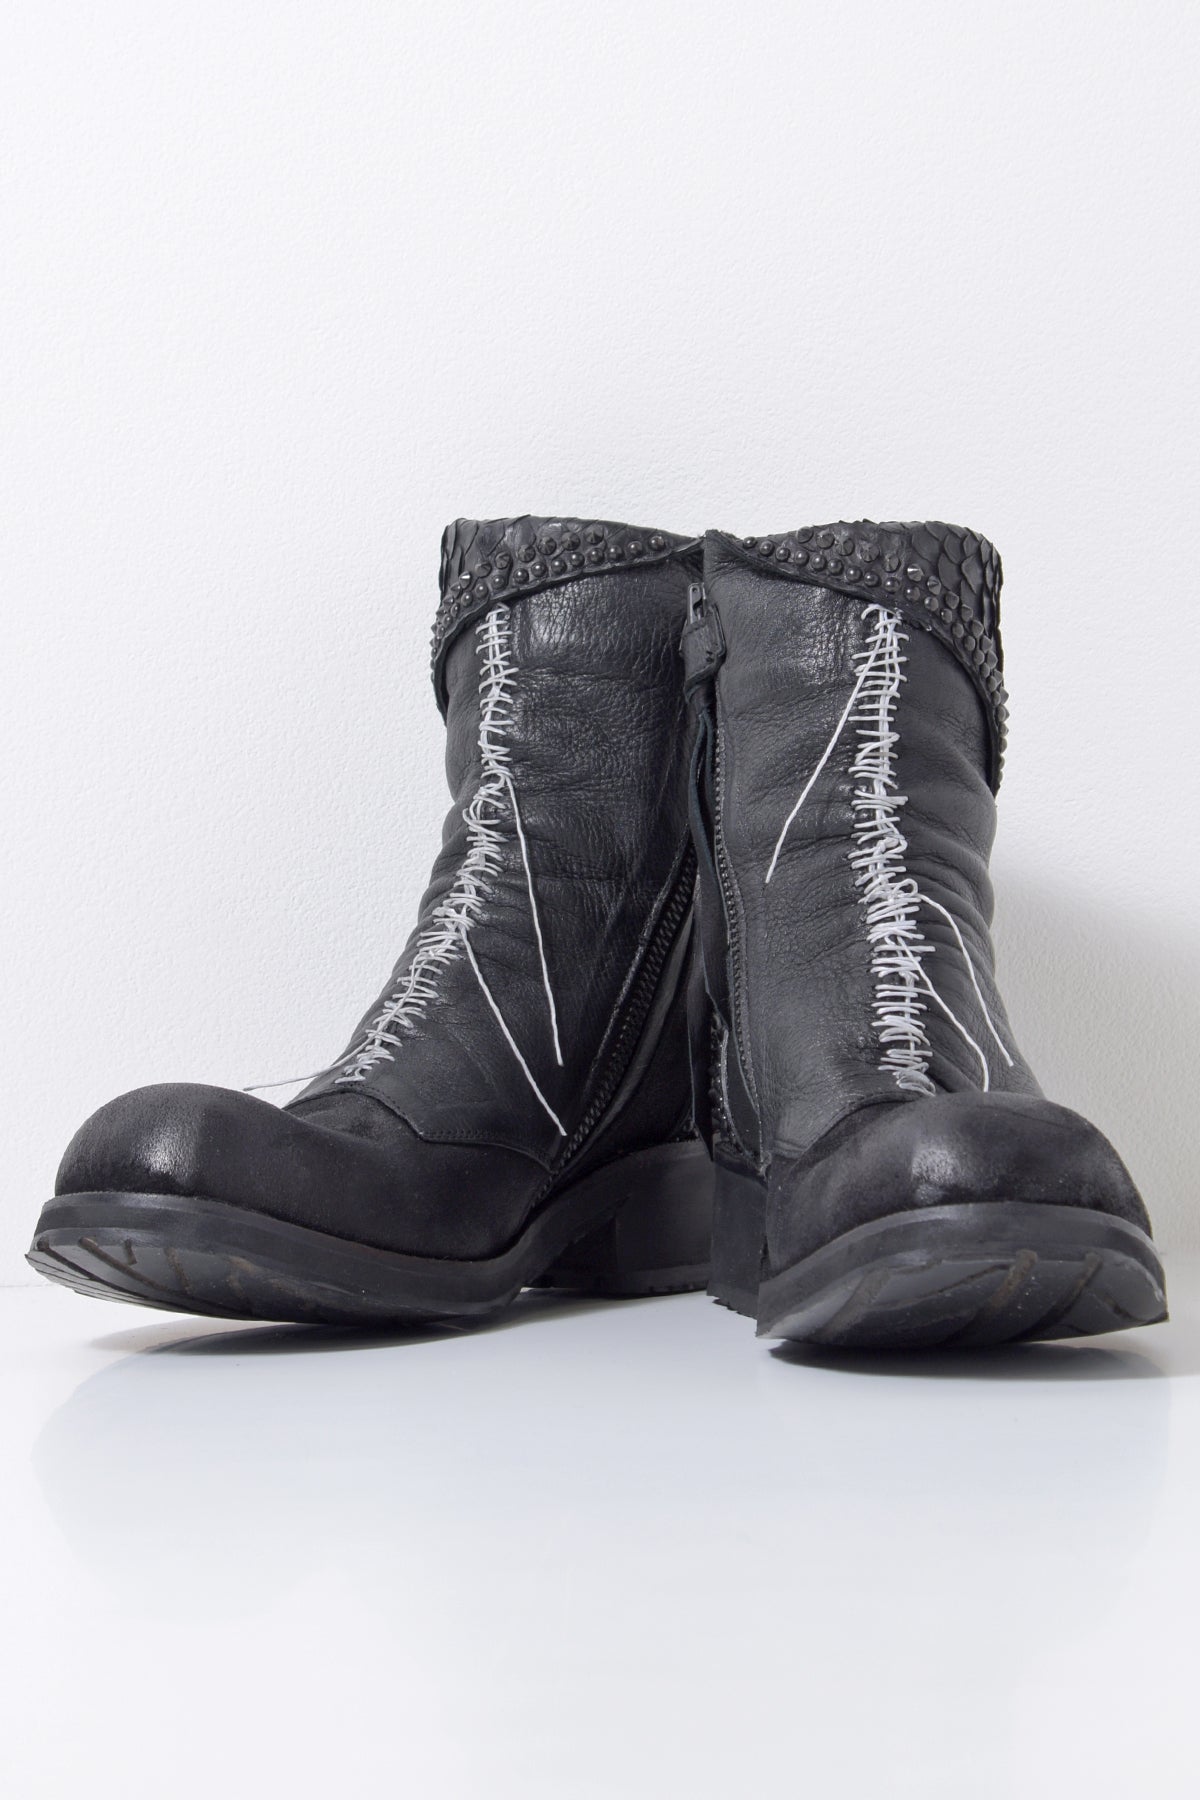 2201-BO01 Crush Boots 14 | KMRii OFFICIAL ONLINE STORE